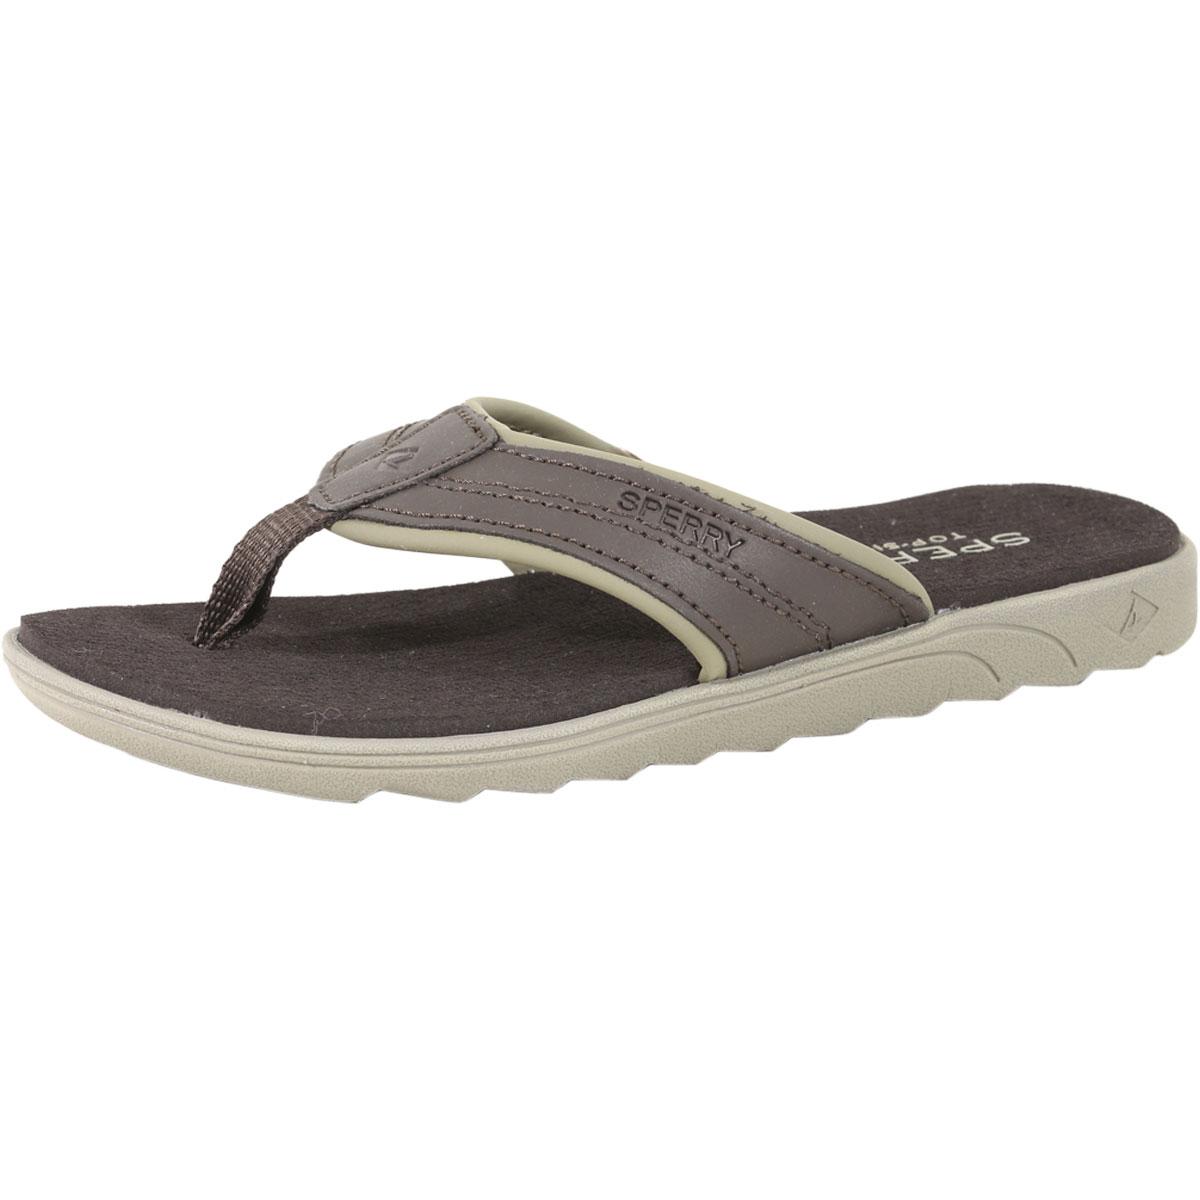 sperry top sider slippers